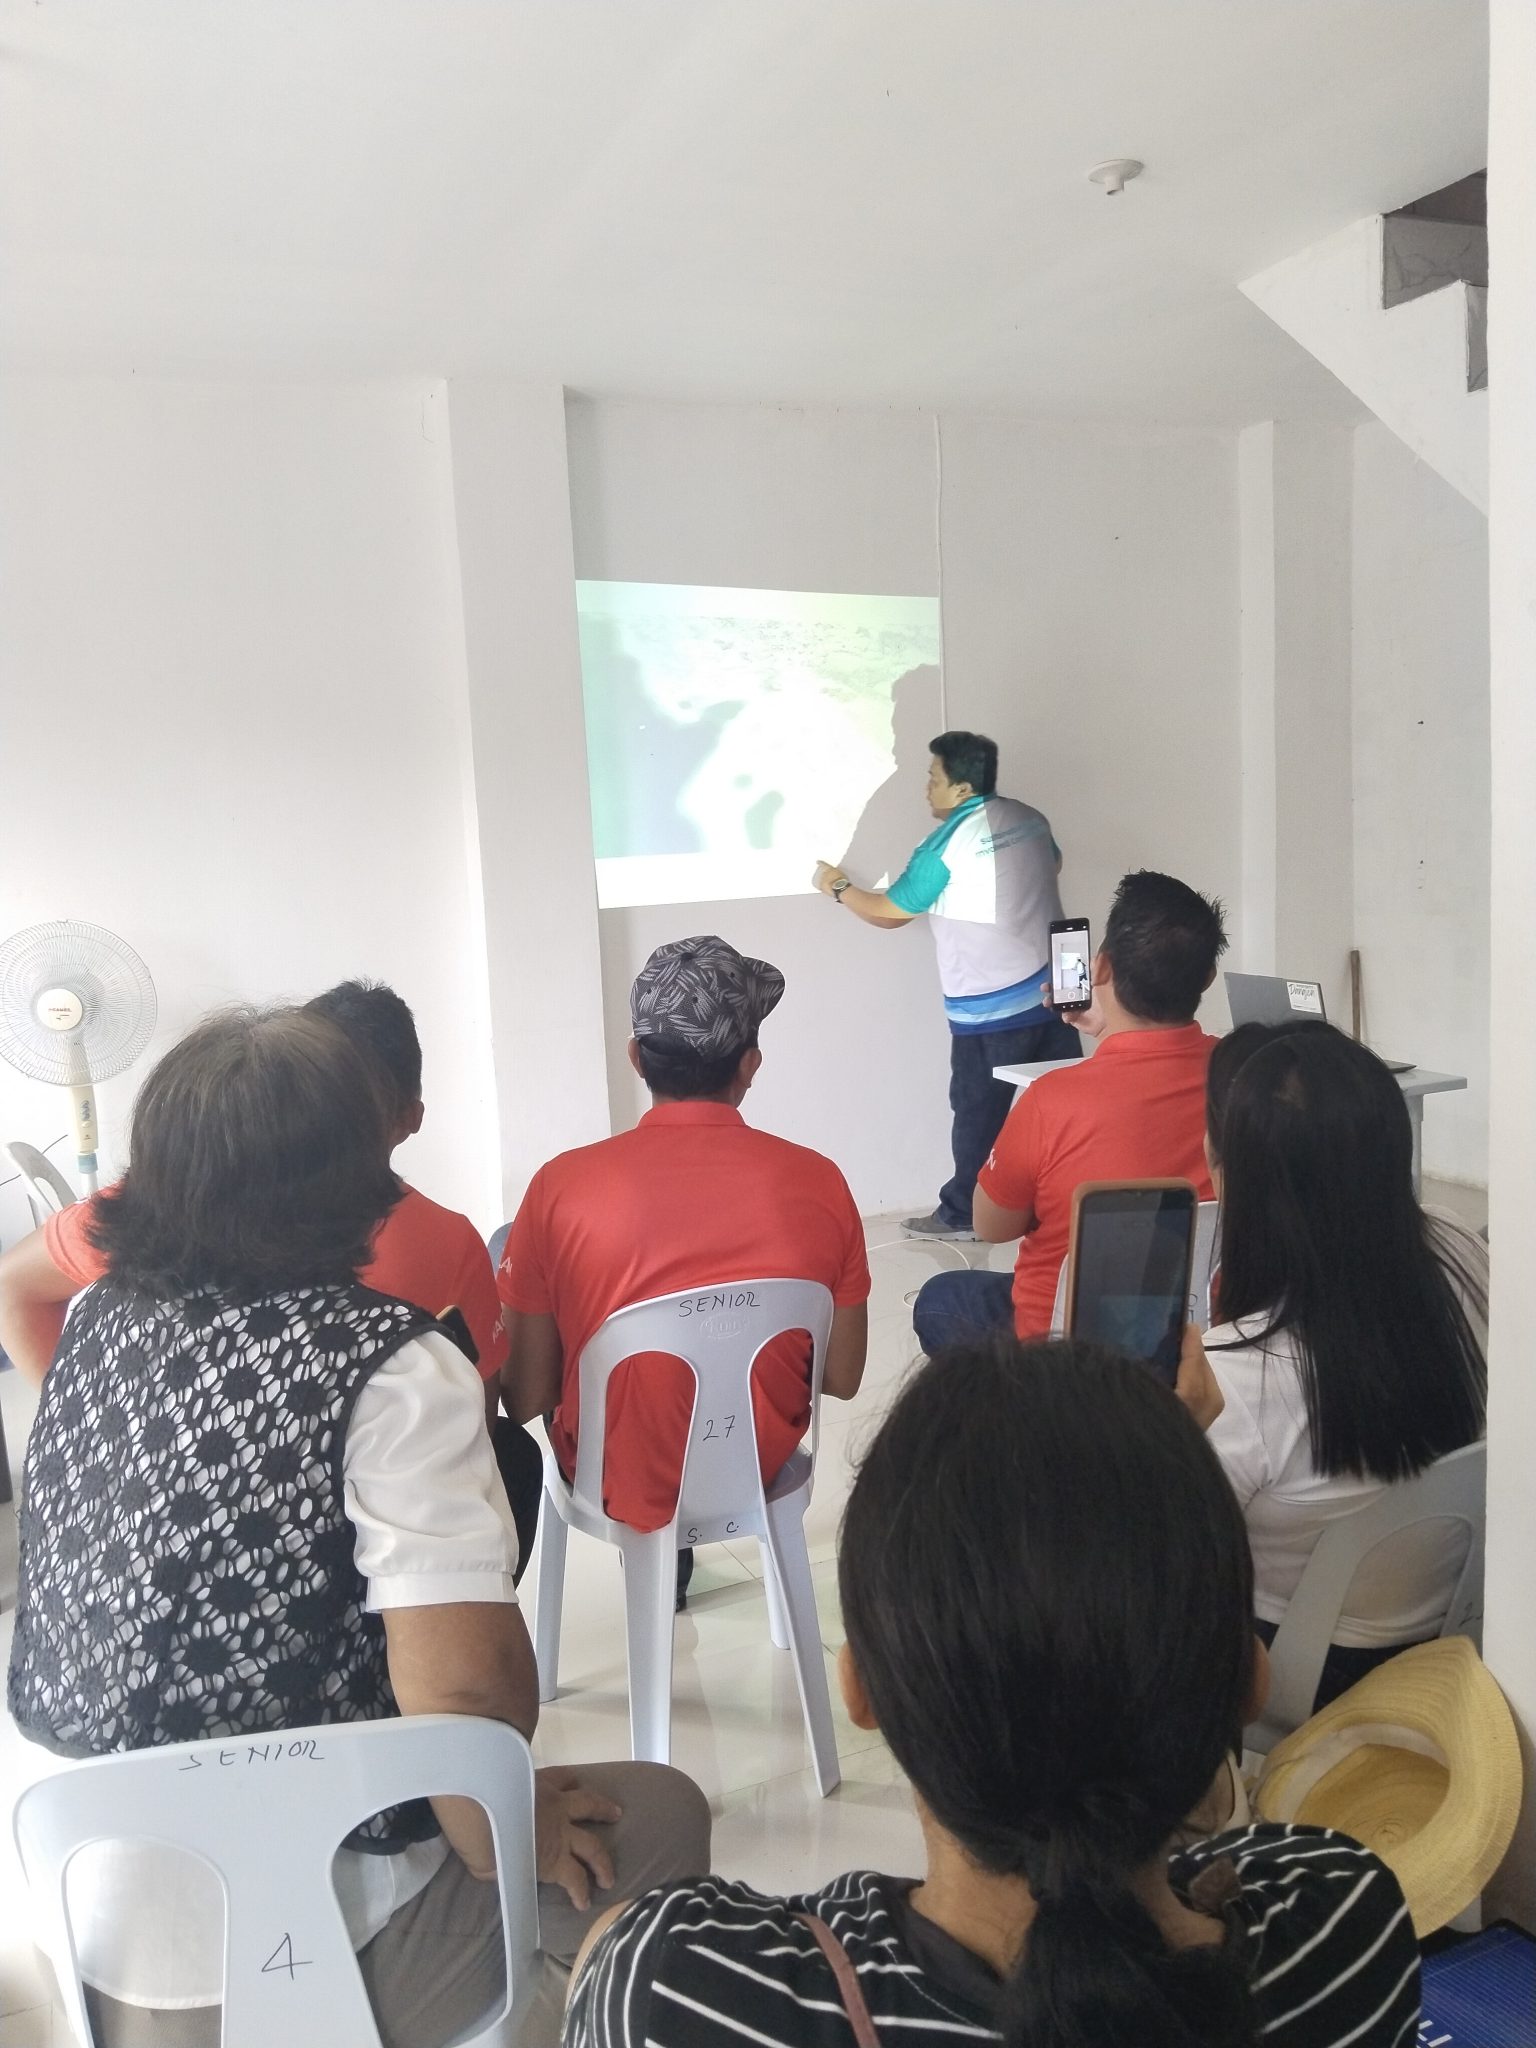 SEE Conservation: The Presentation of the Proposed MPA redesign for Bugas Marine Protected Area in Badian, Cebu